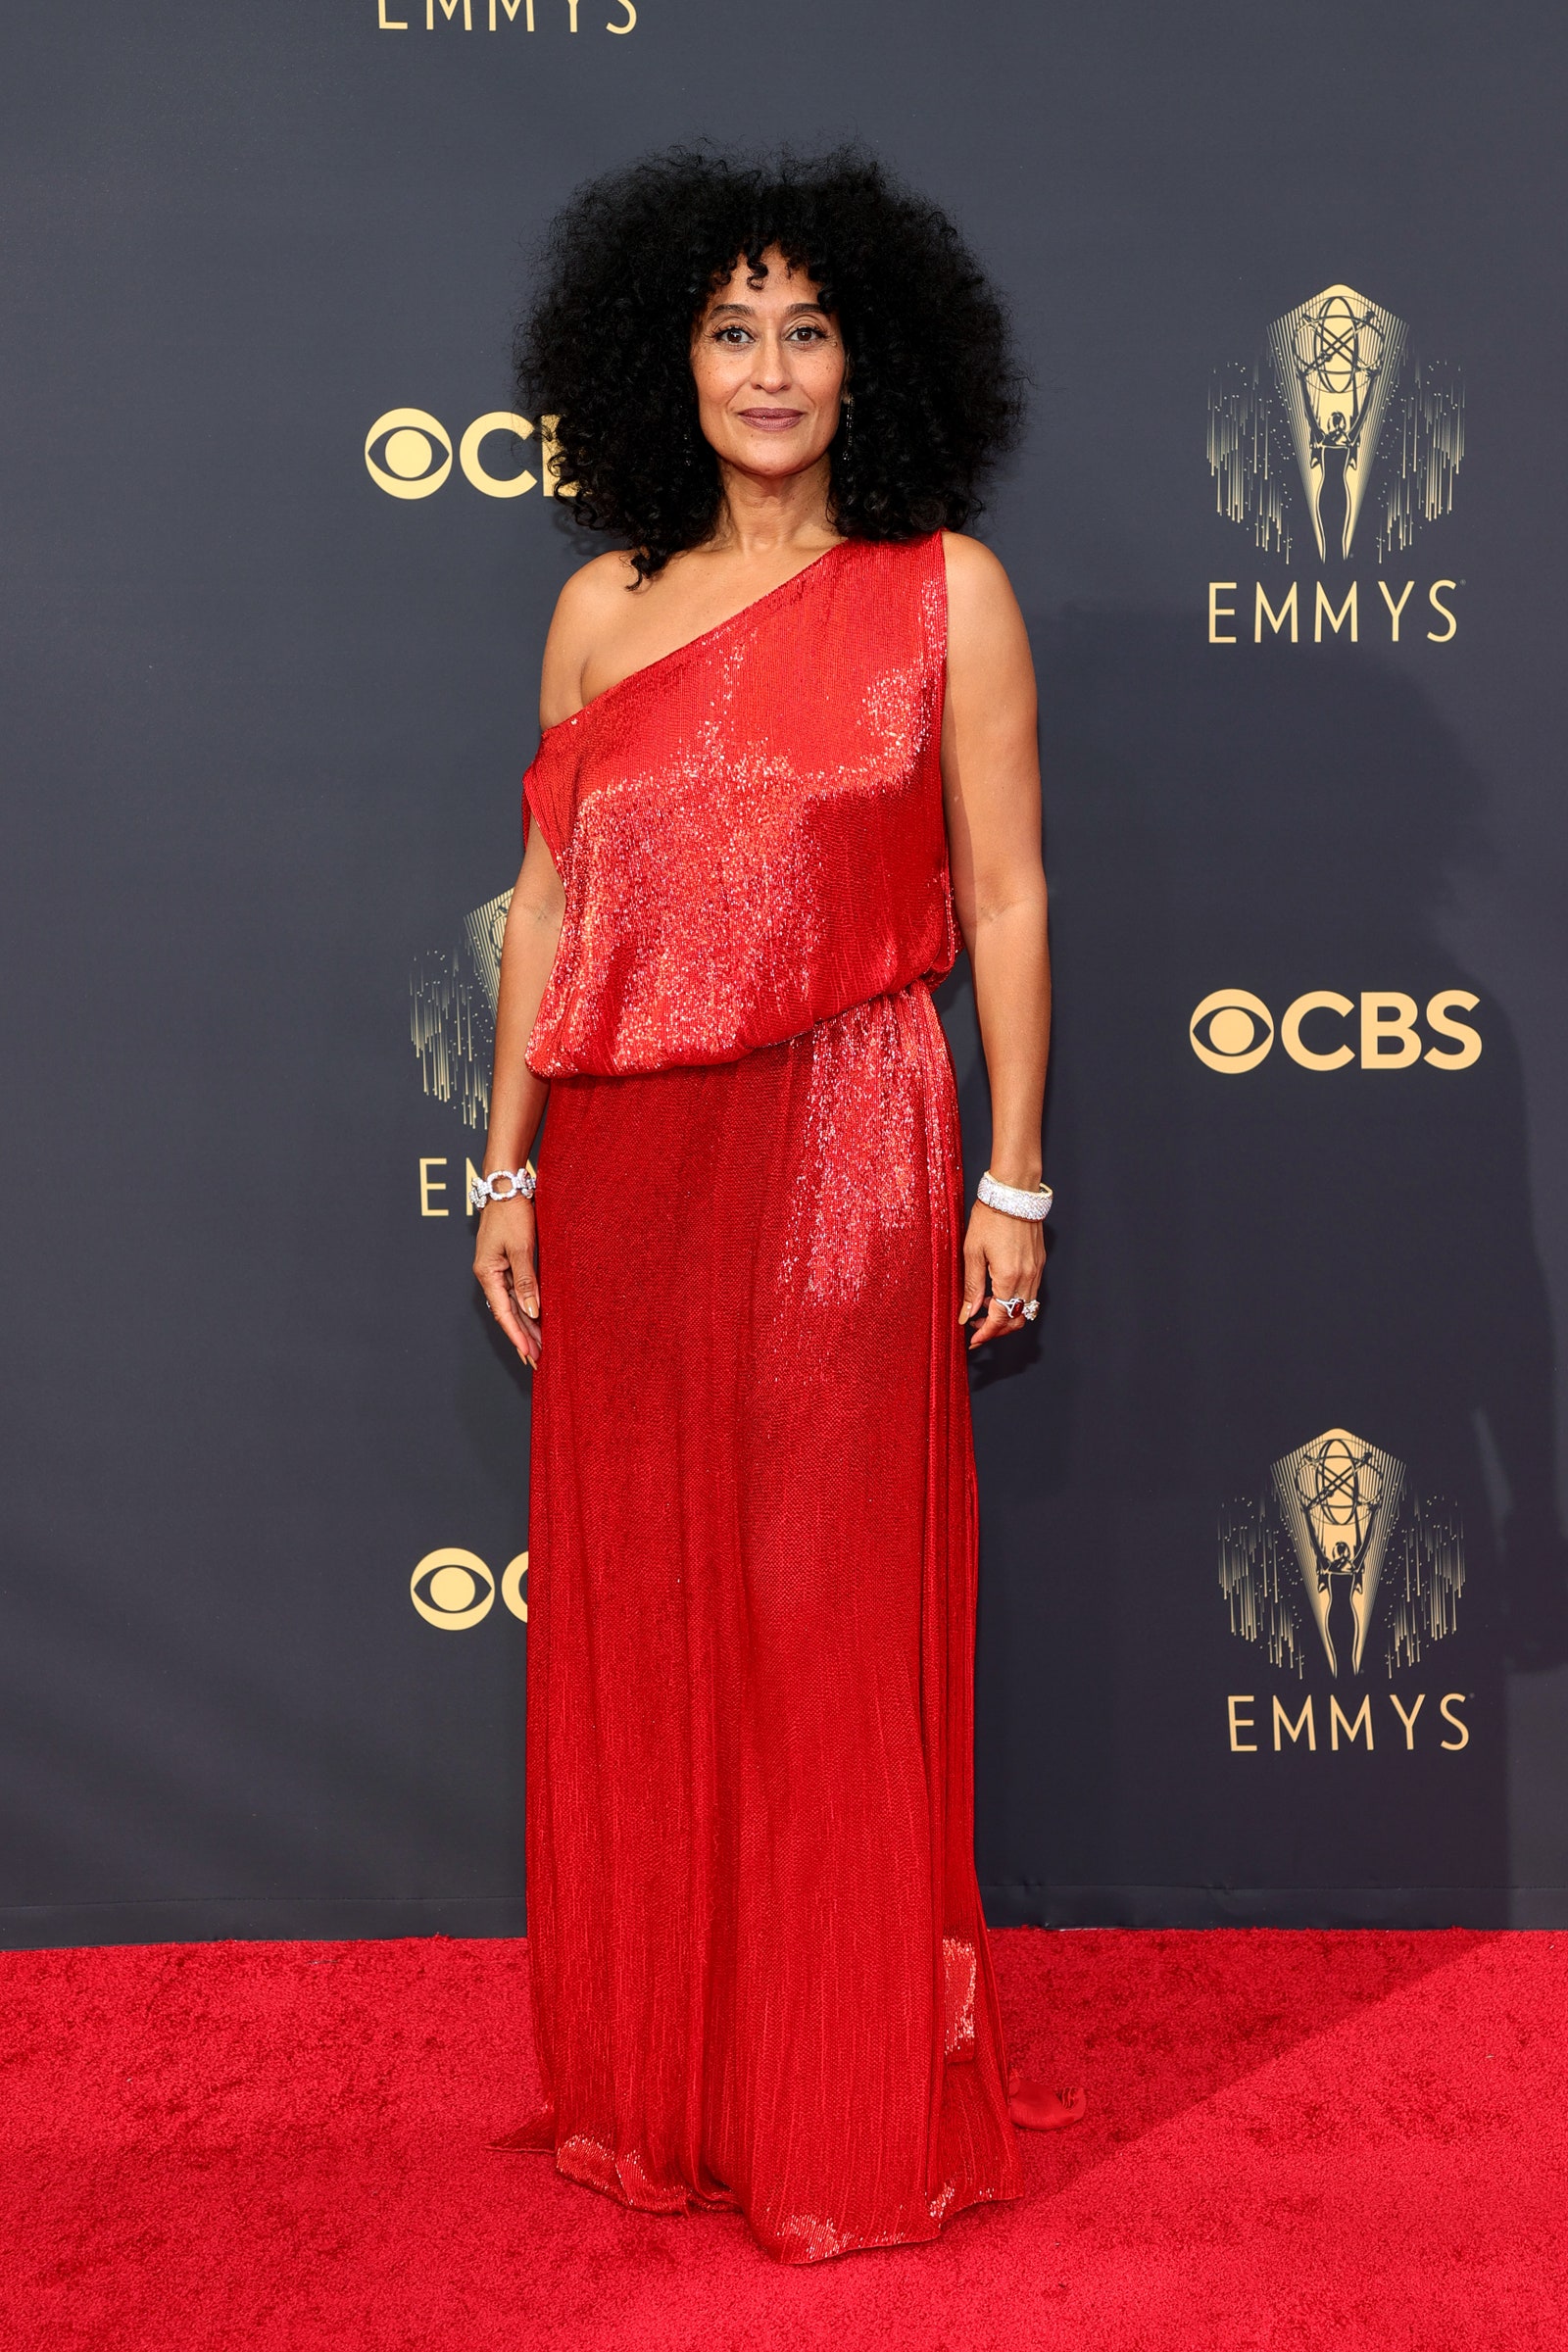 Tracee Ellis Ross at the 2021 Emmys Awards